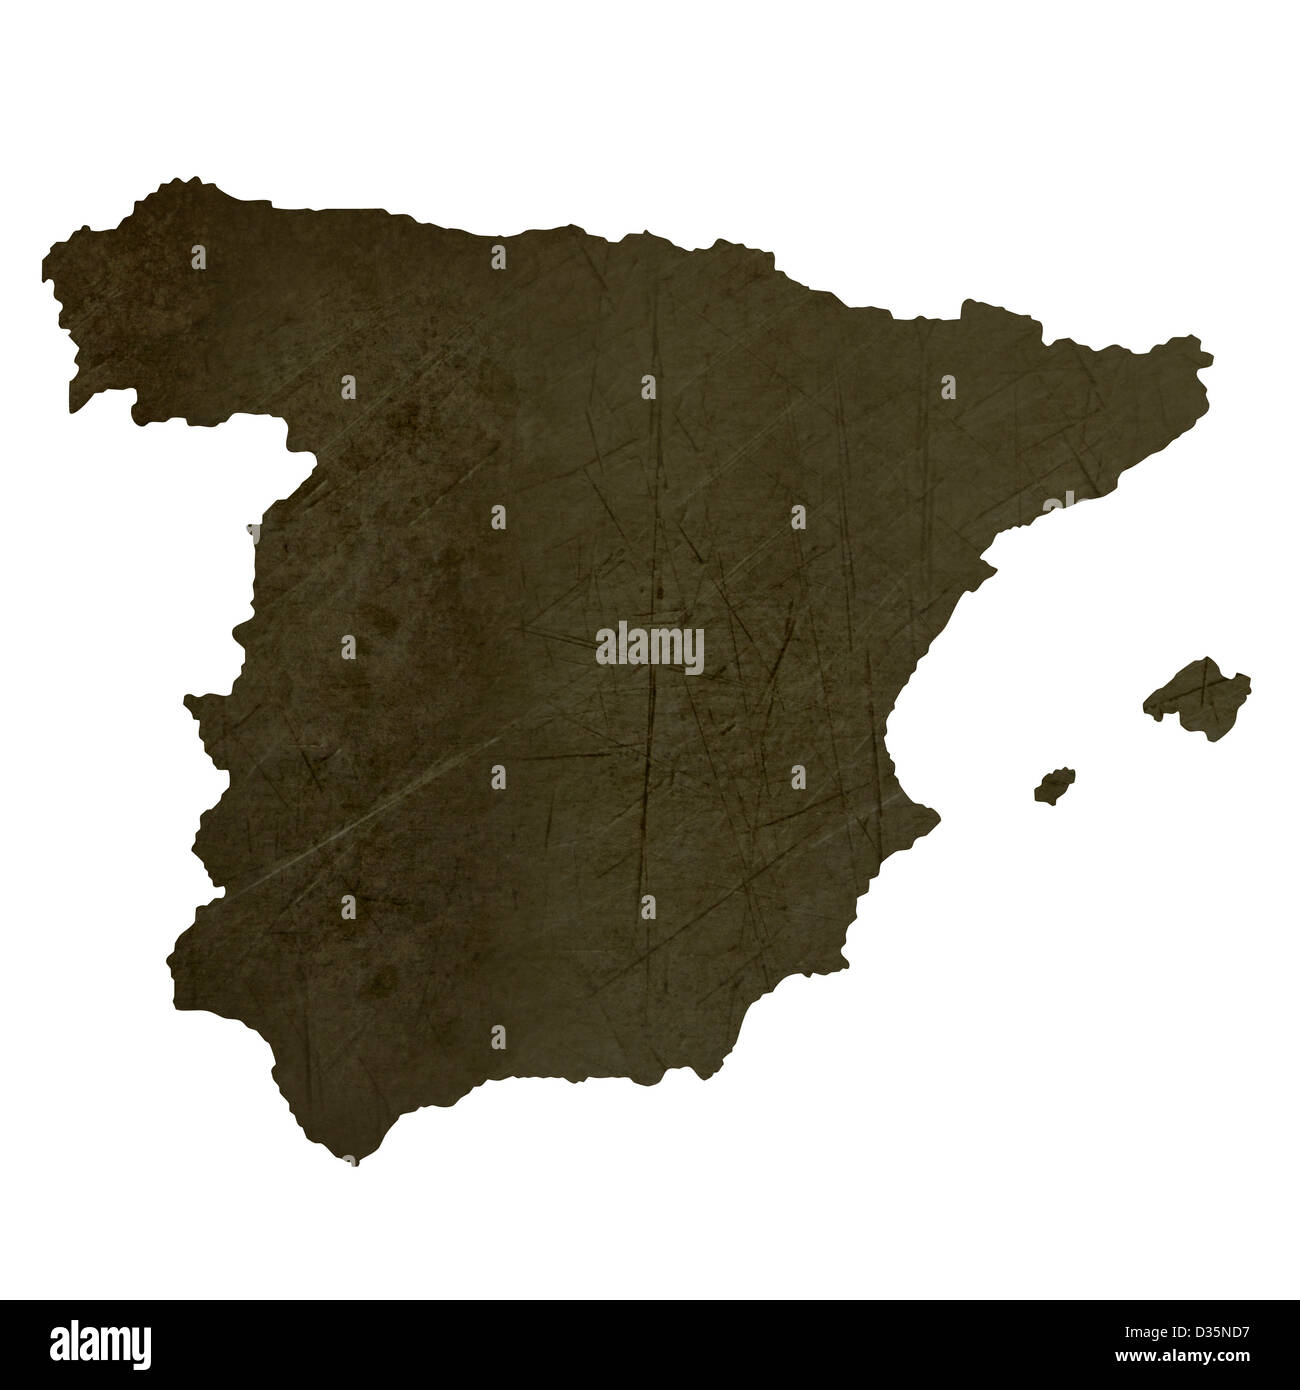 Dark silhouetted and textured map of Spain isolated on white background. Stock Photo